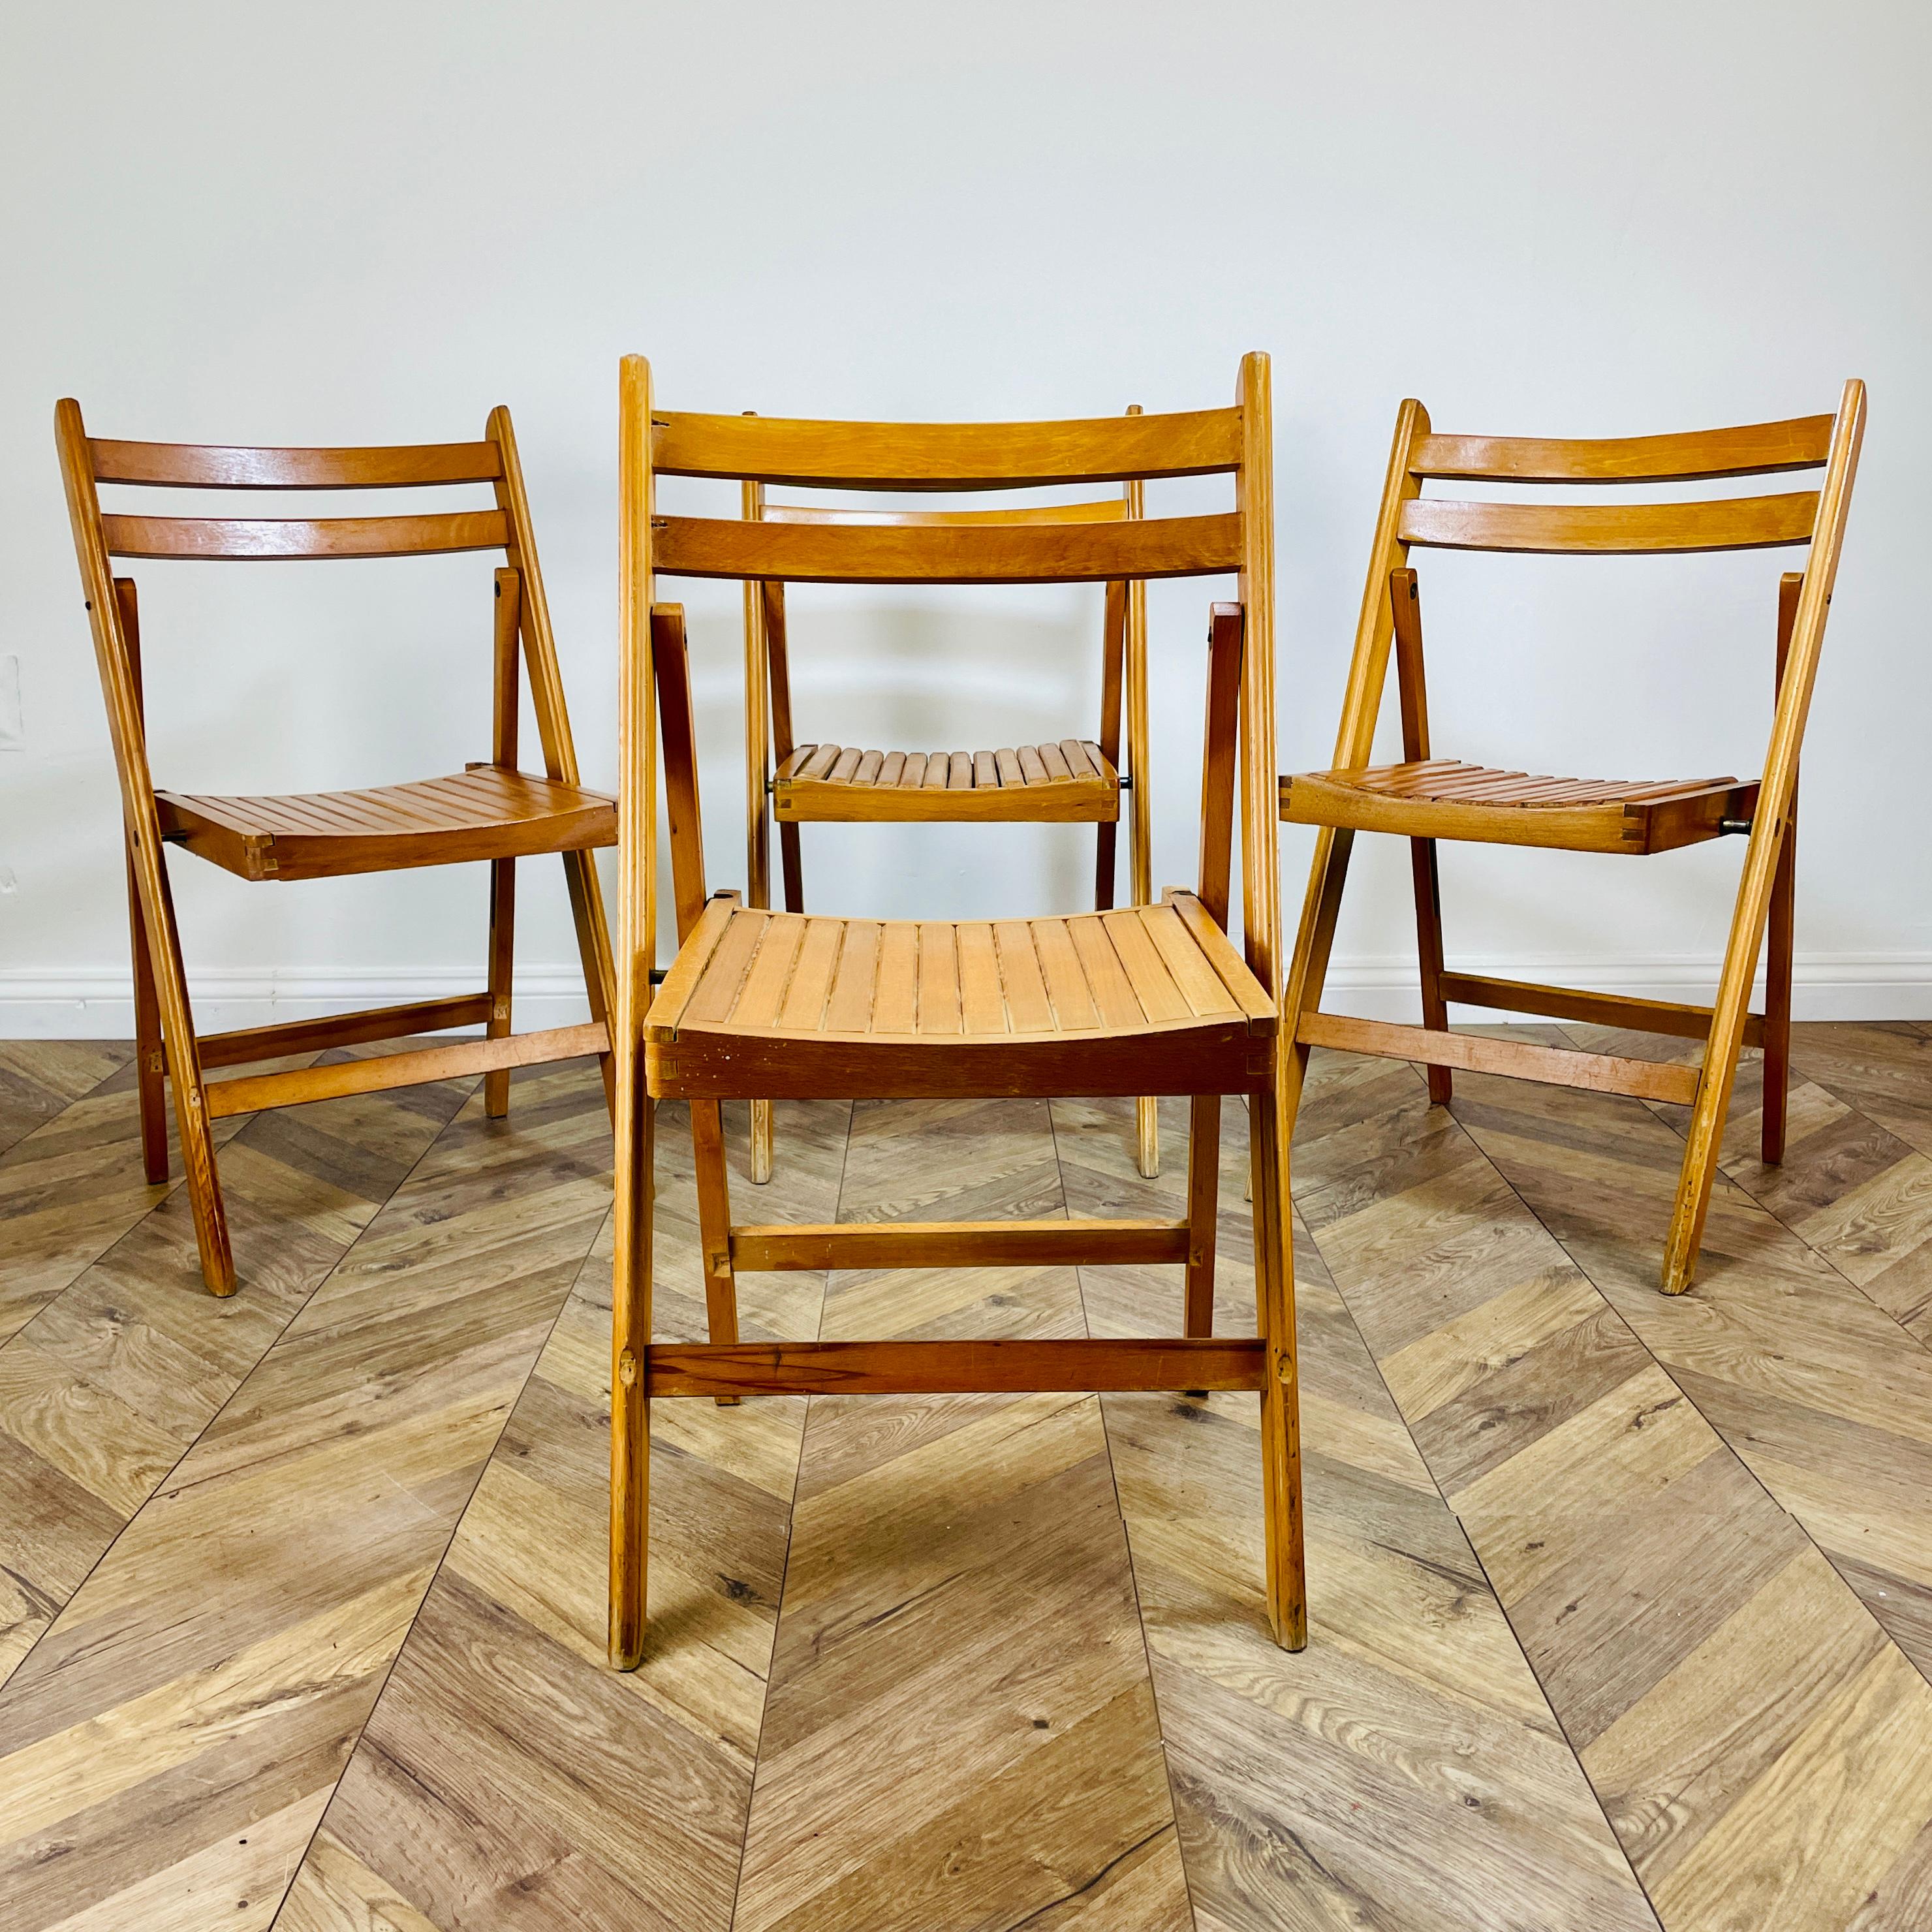 Mid-Century Modern Vintage Wooden Folding Chairs by Centa, Set of 4, 1960s